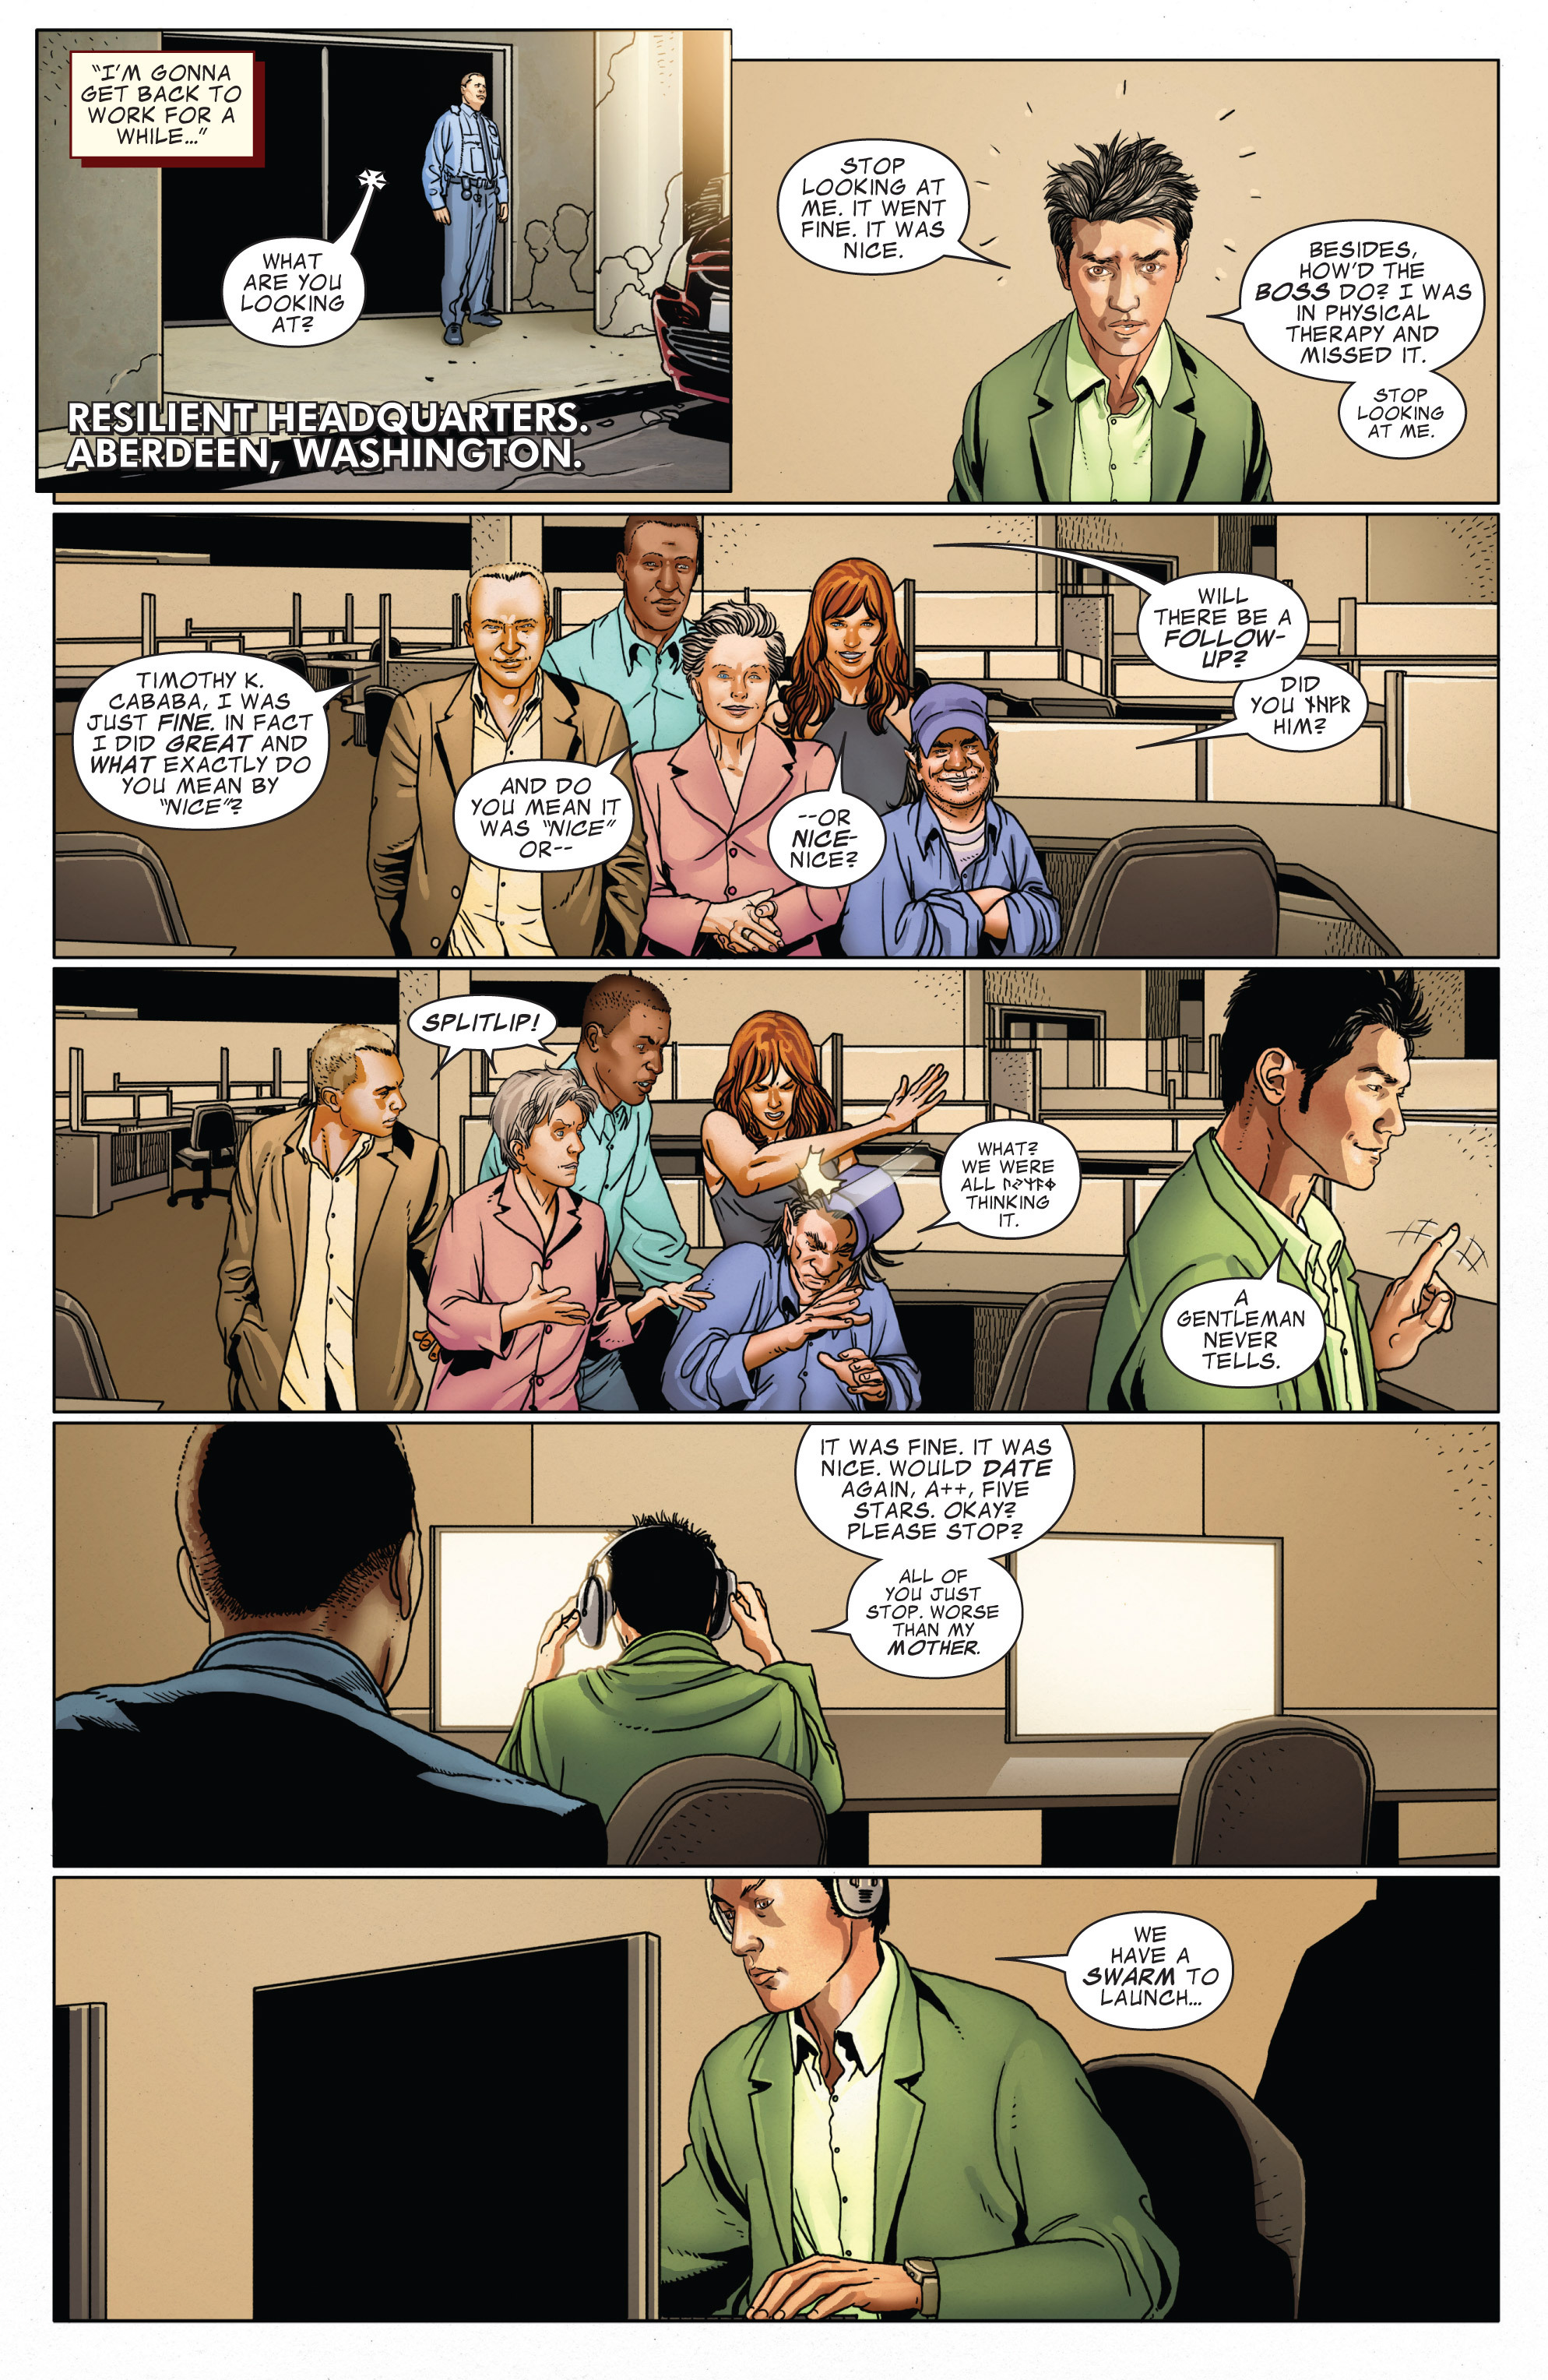 Invincible Iron Man (2008) 521 Page 13